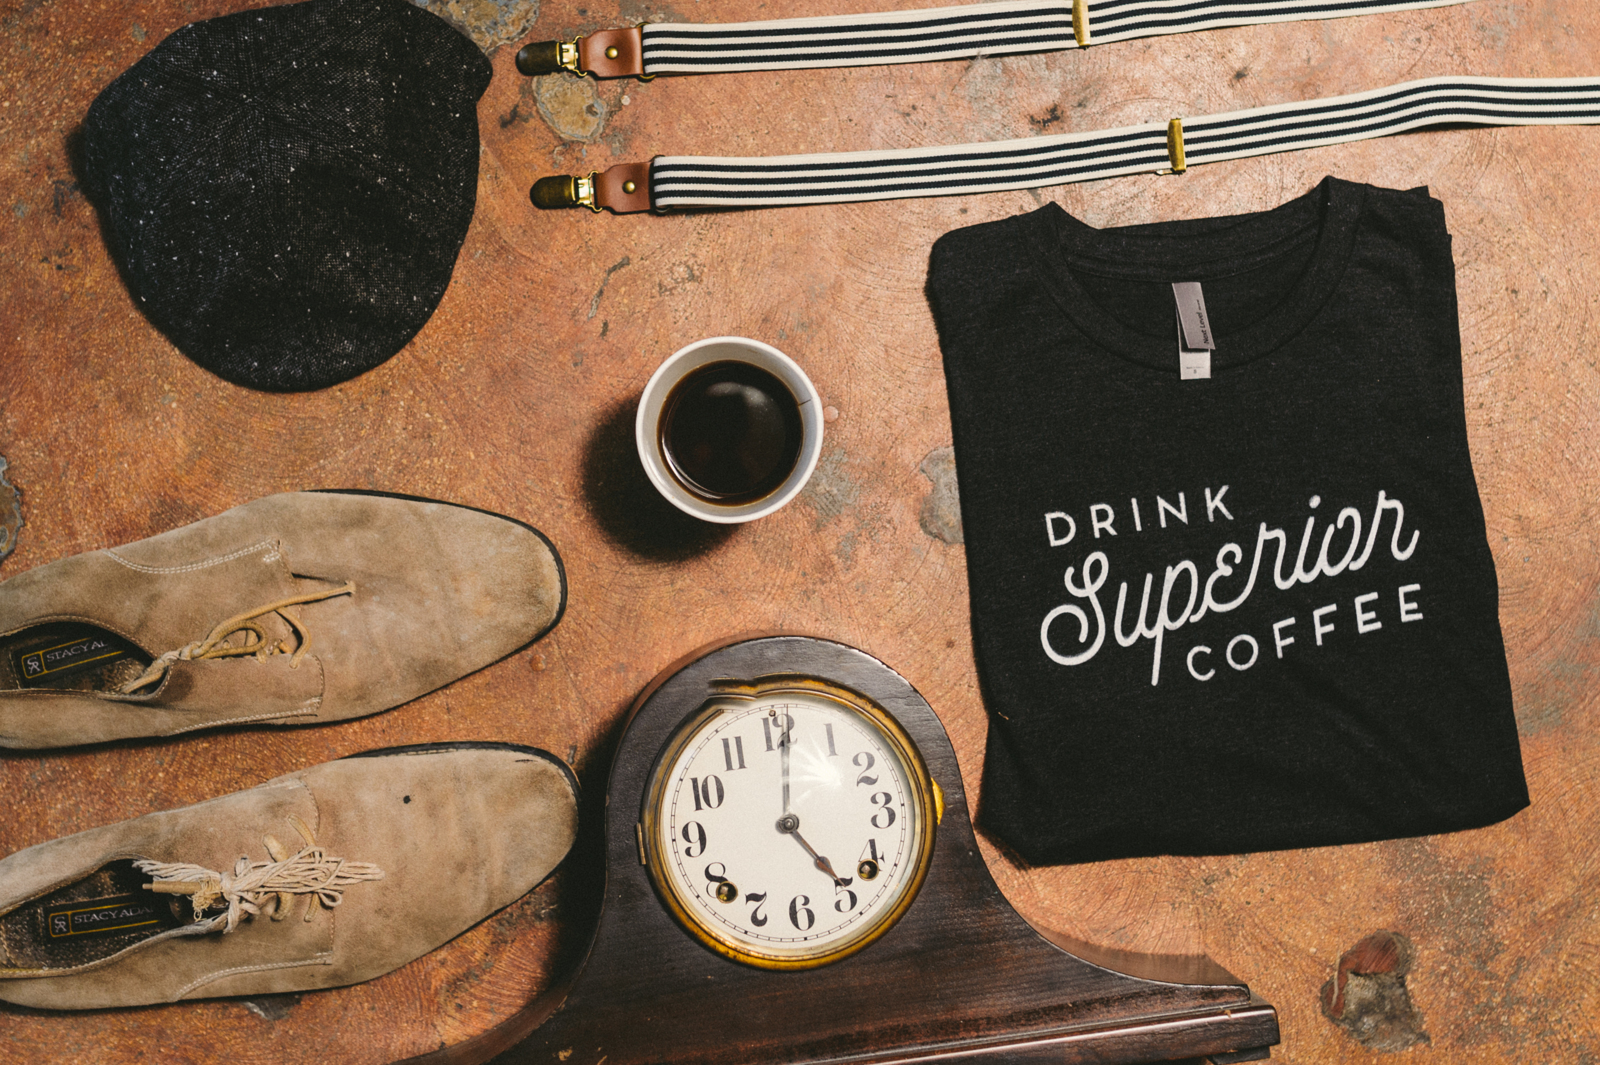 The Benefits of Creating Content en Masse Leather shoes, old mantle clock, black t shirt that says Drink Superior Coffee a coffee cup of coffee, a black cap and striped suspenders on display